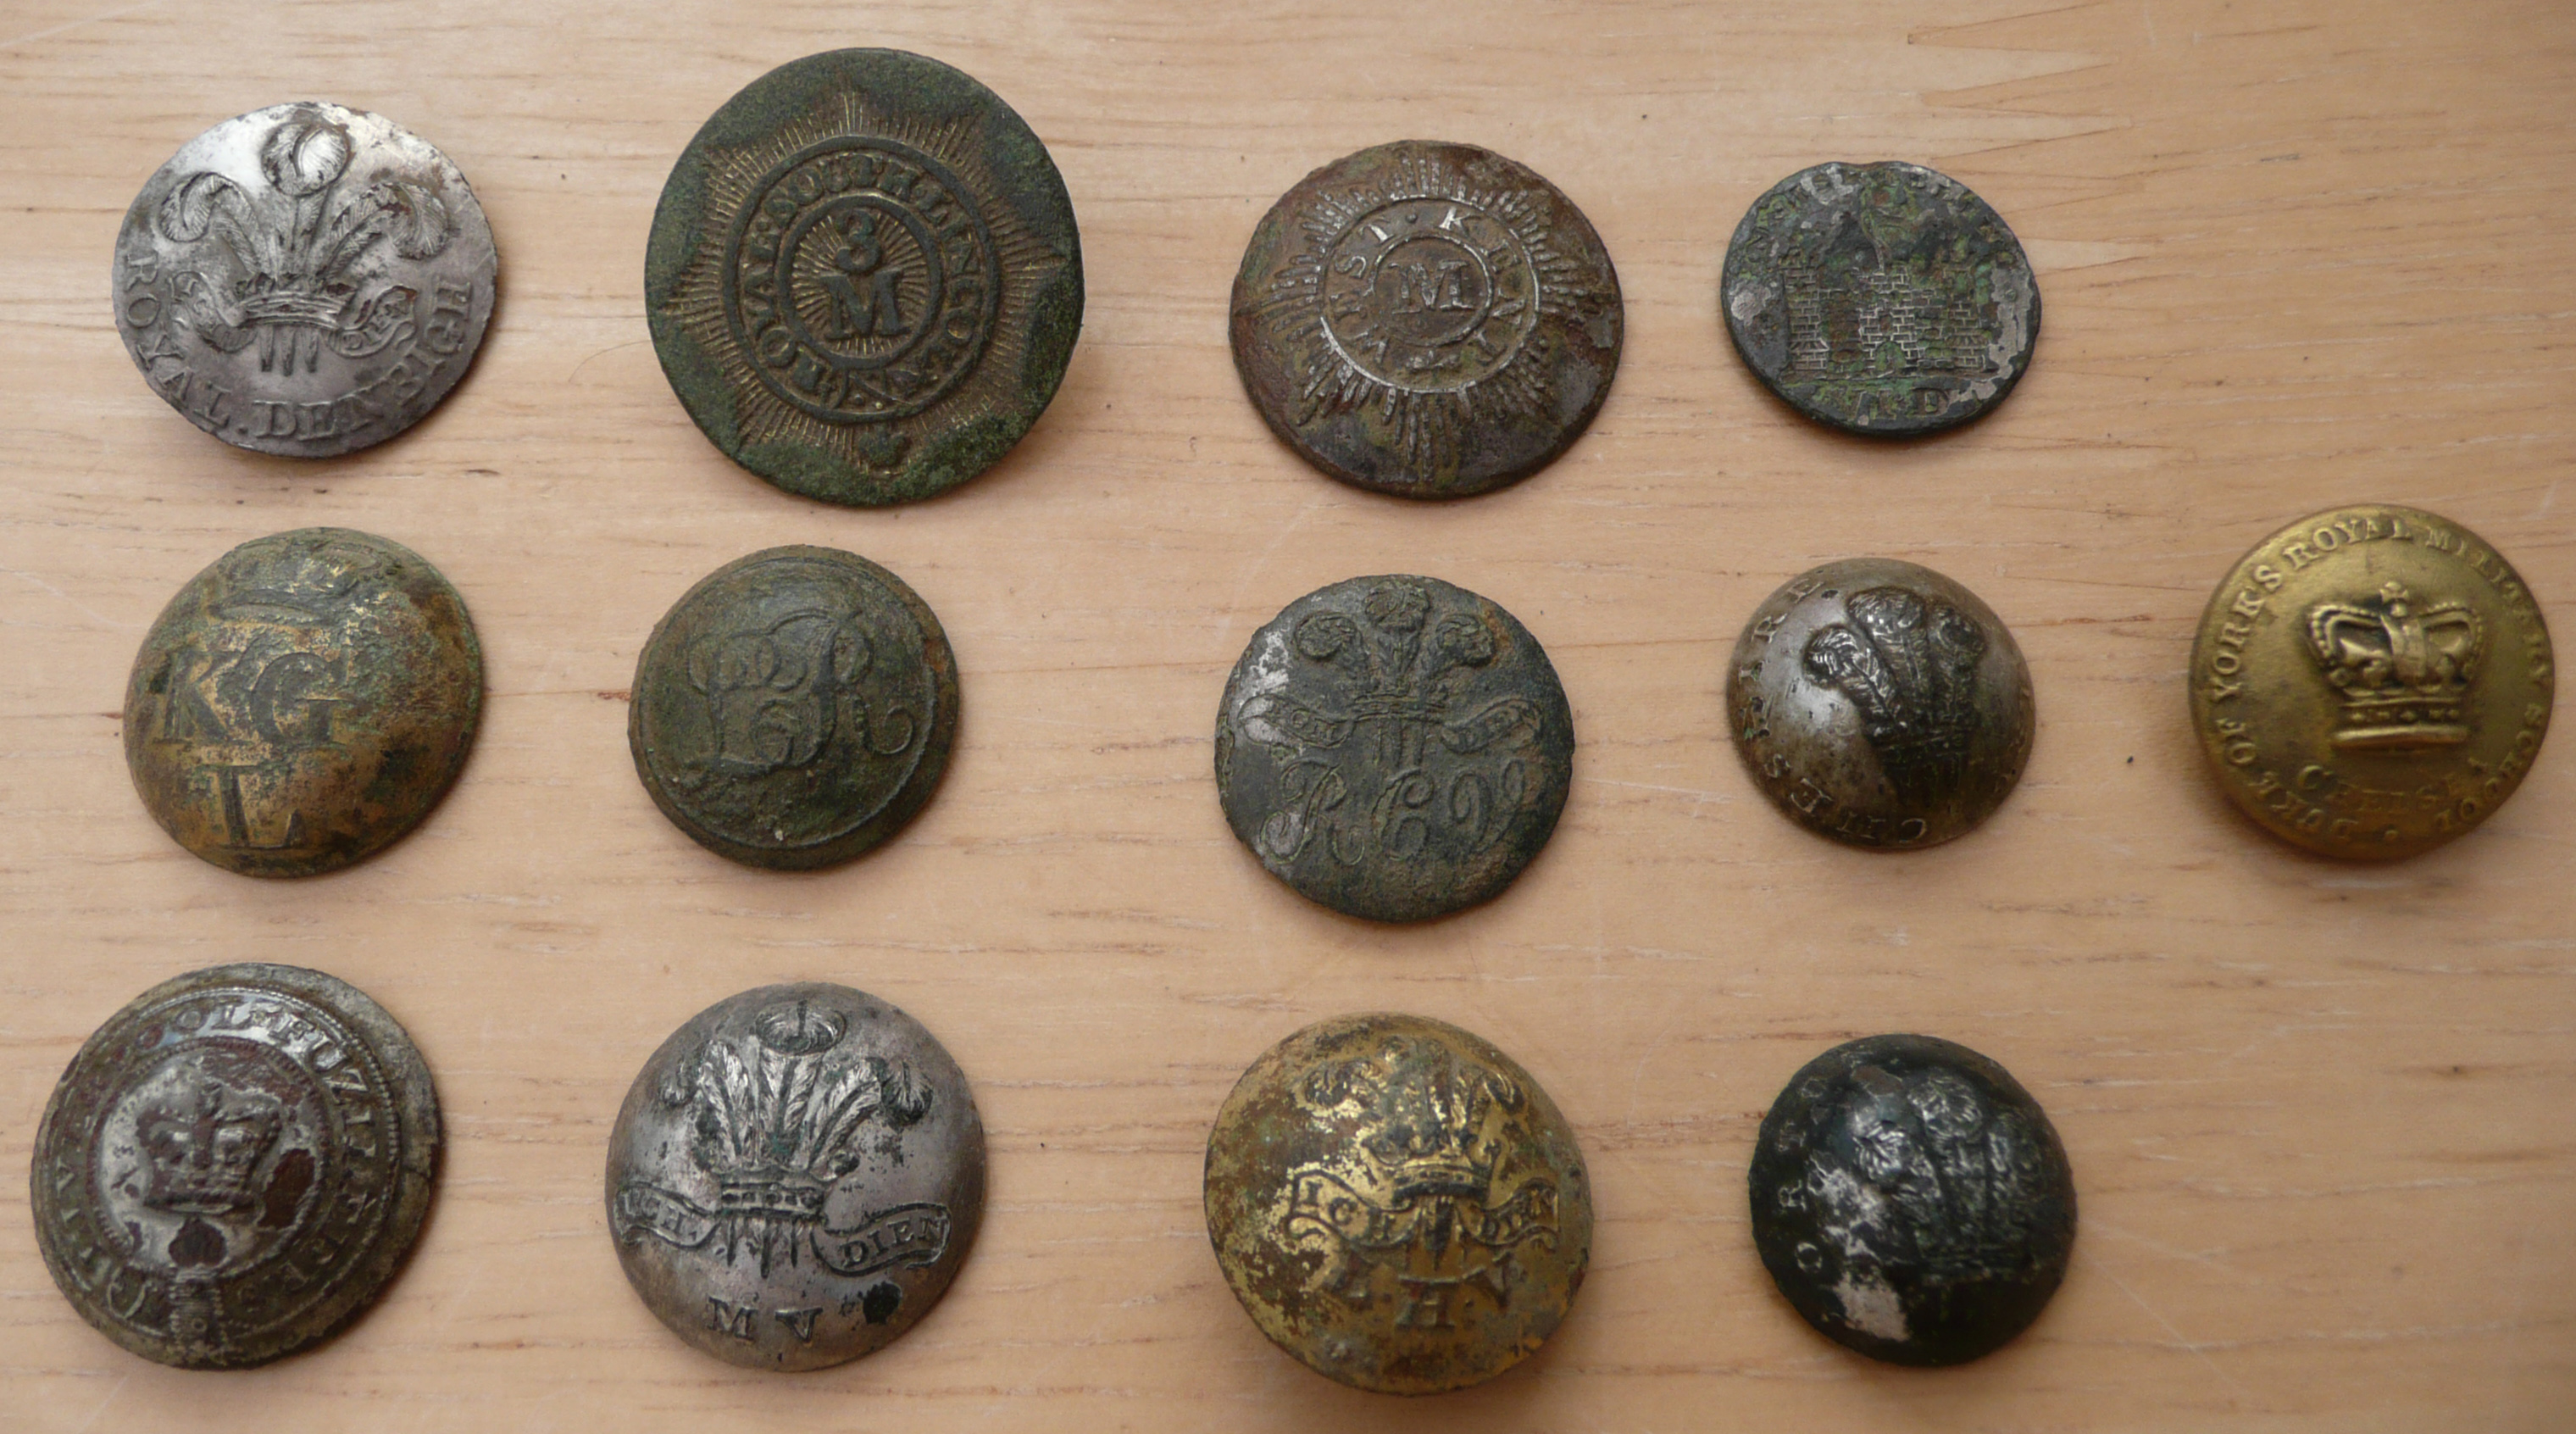 military buttons1.jpg